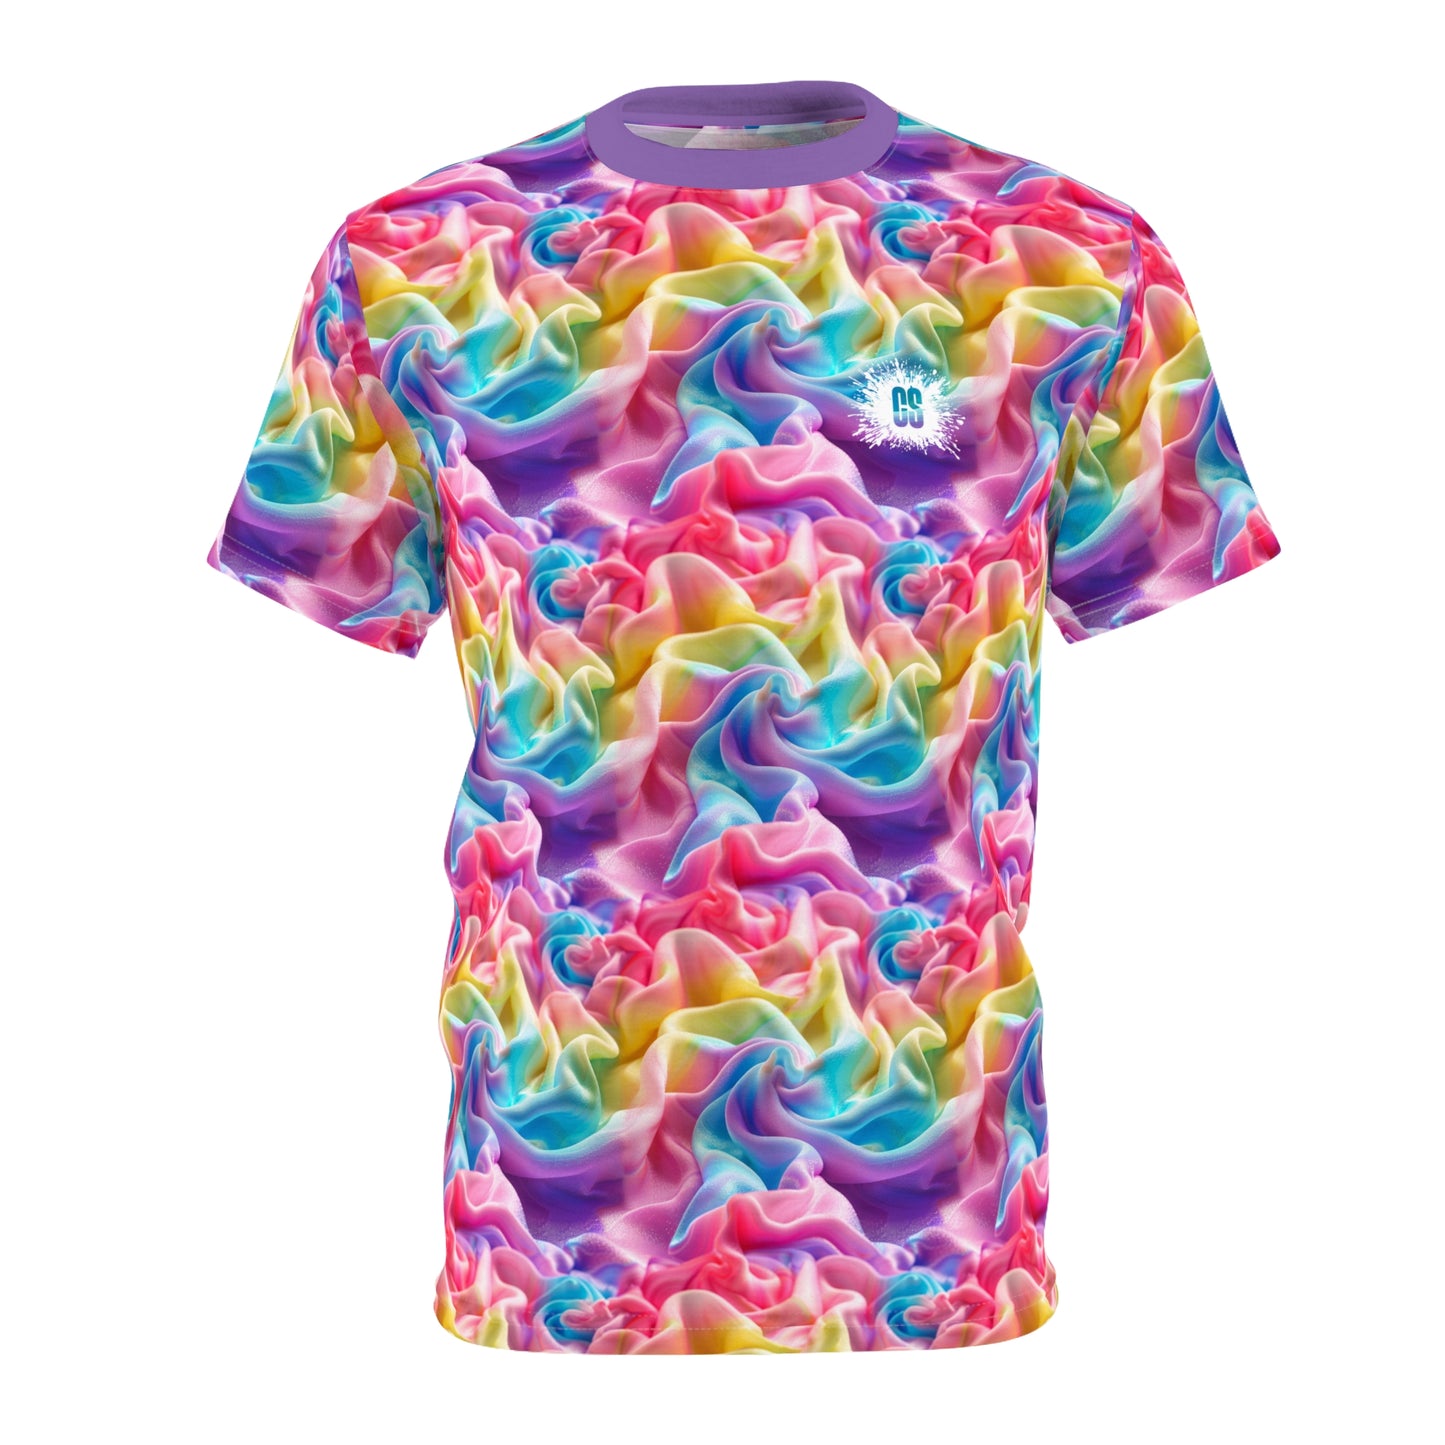 Cotton Candy Clouds Unisex Cut & Sew Tee